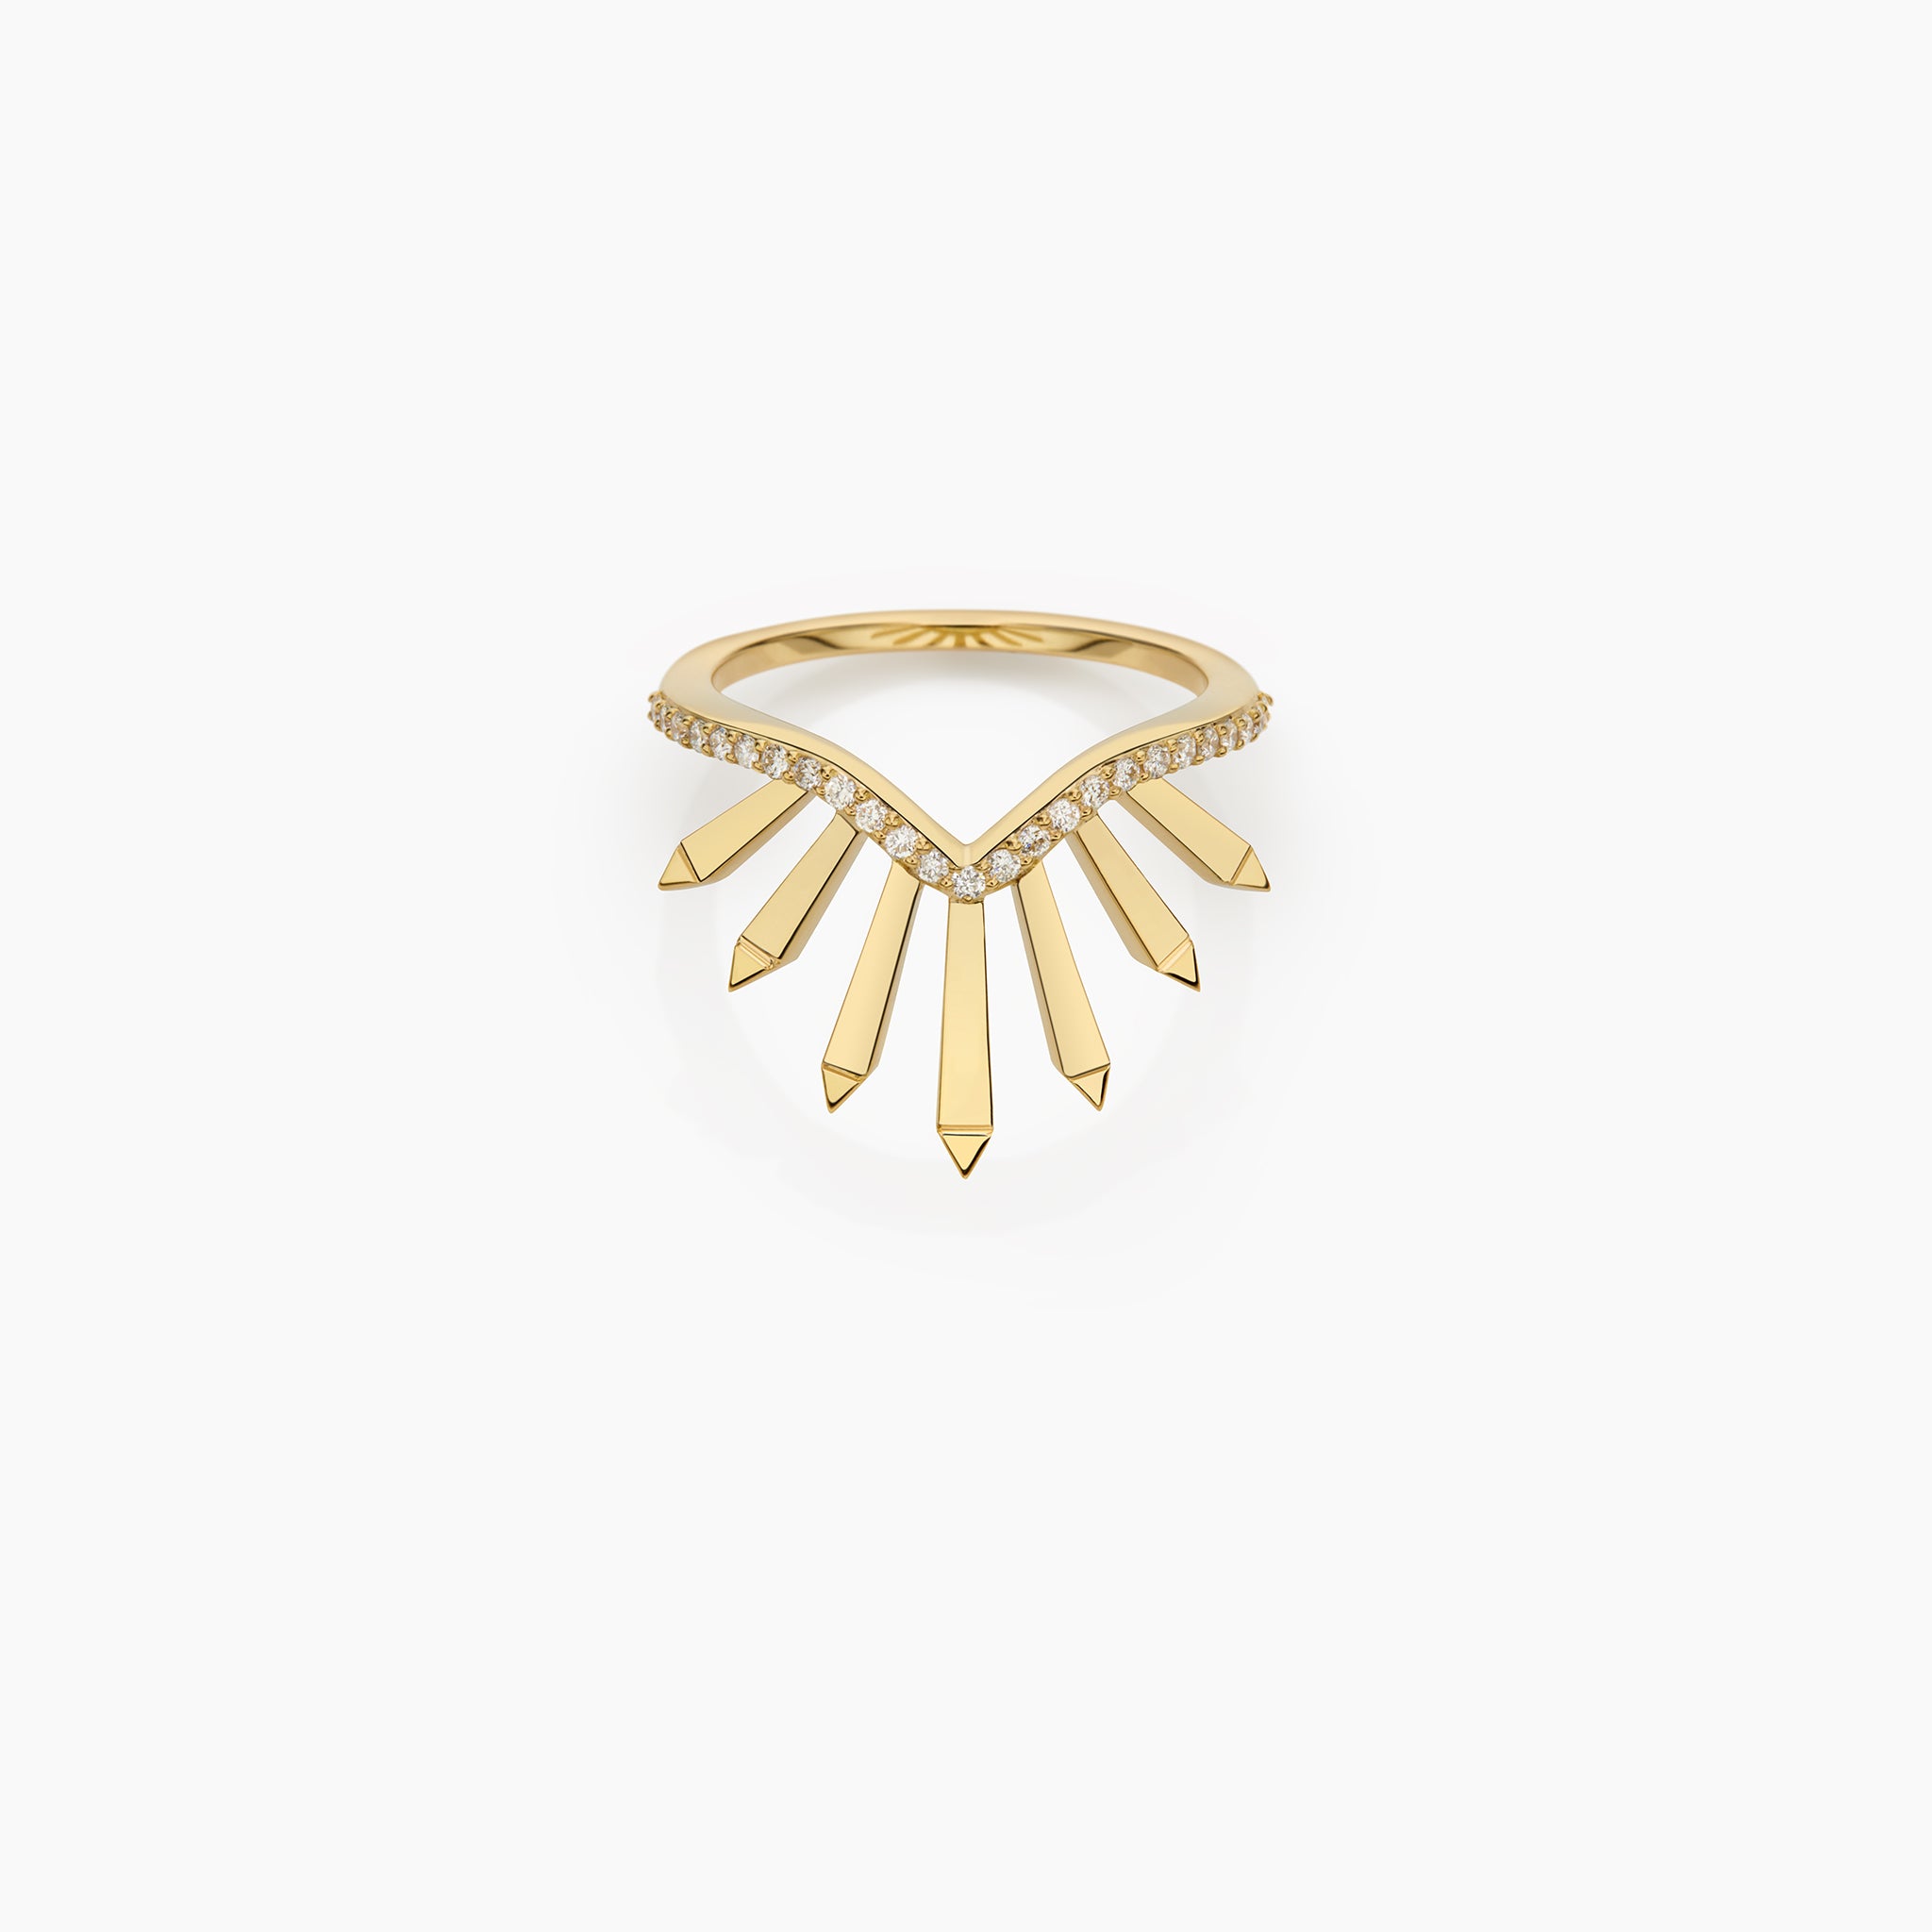 Yellow Gold Ring: Featuring radiant sunburst motifs adorned with diamonds, showcased against an off-white background.